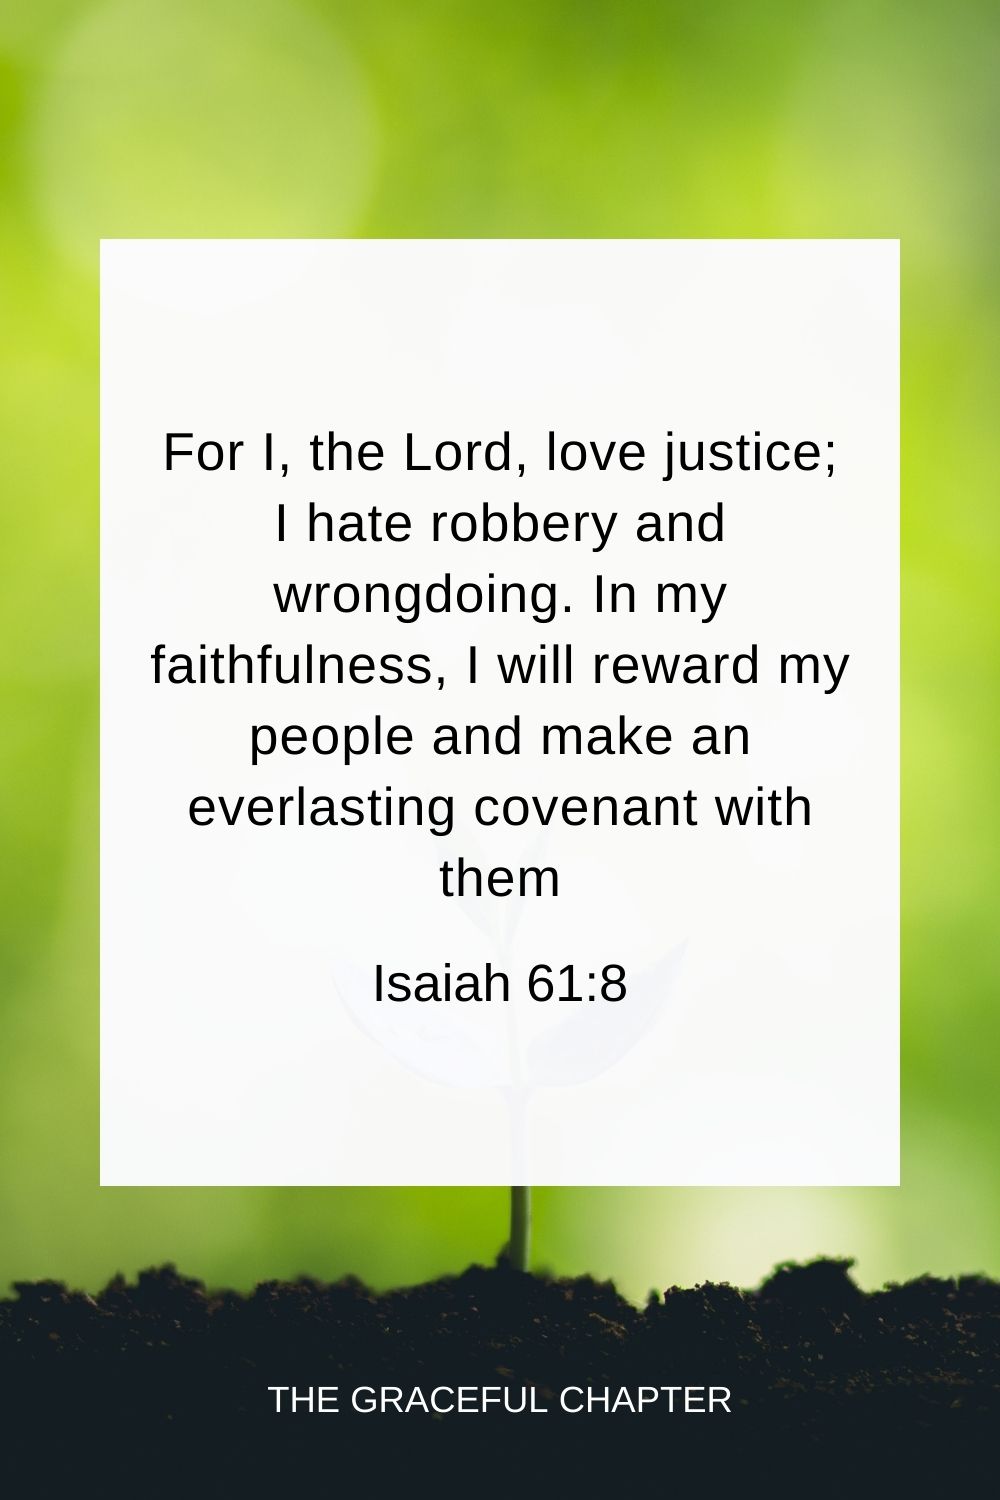 For I, the Lord, love justice; I hate robbery and wrongdoing. In my faithfulness, I will reward my people and make an everlasting covenant with them. Isaiah 61:8